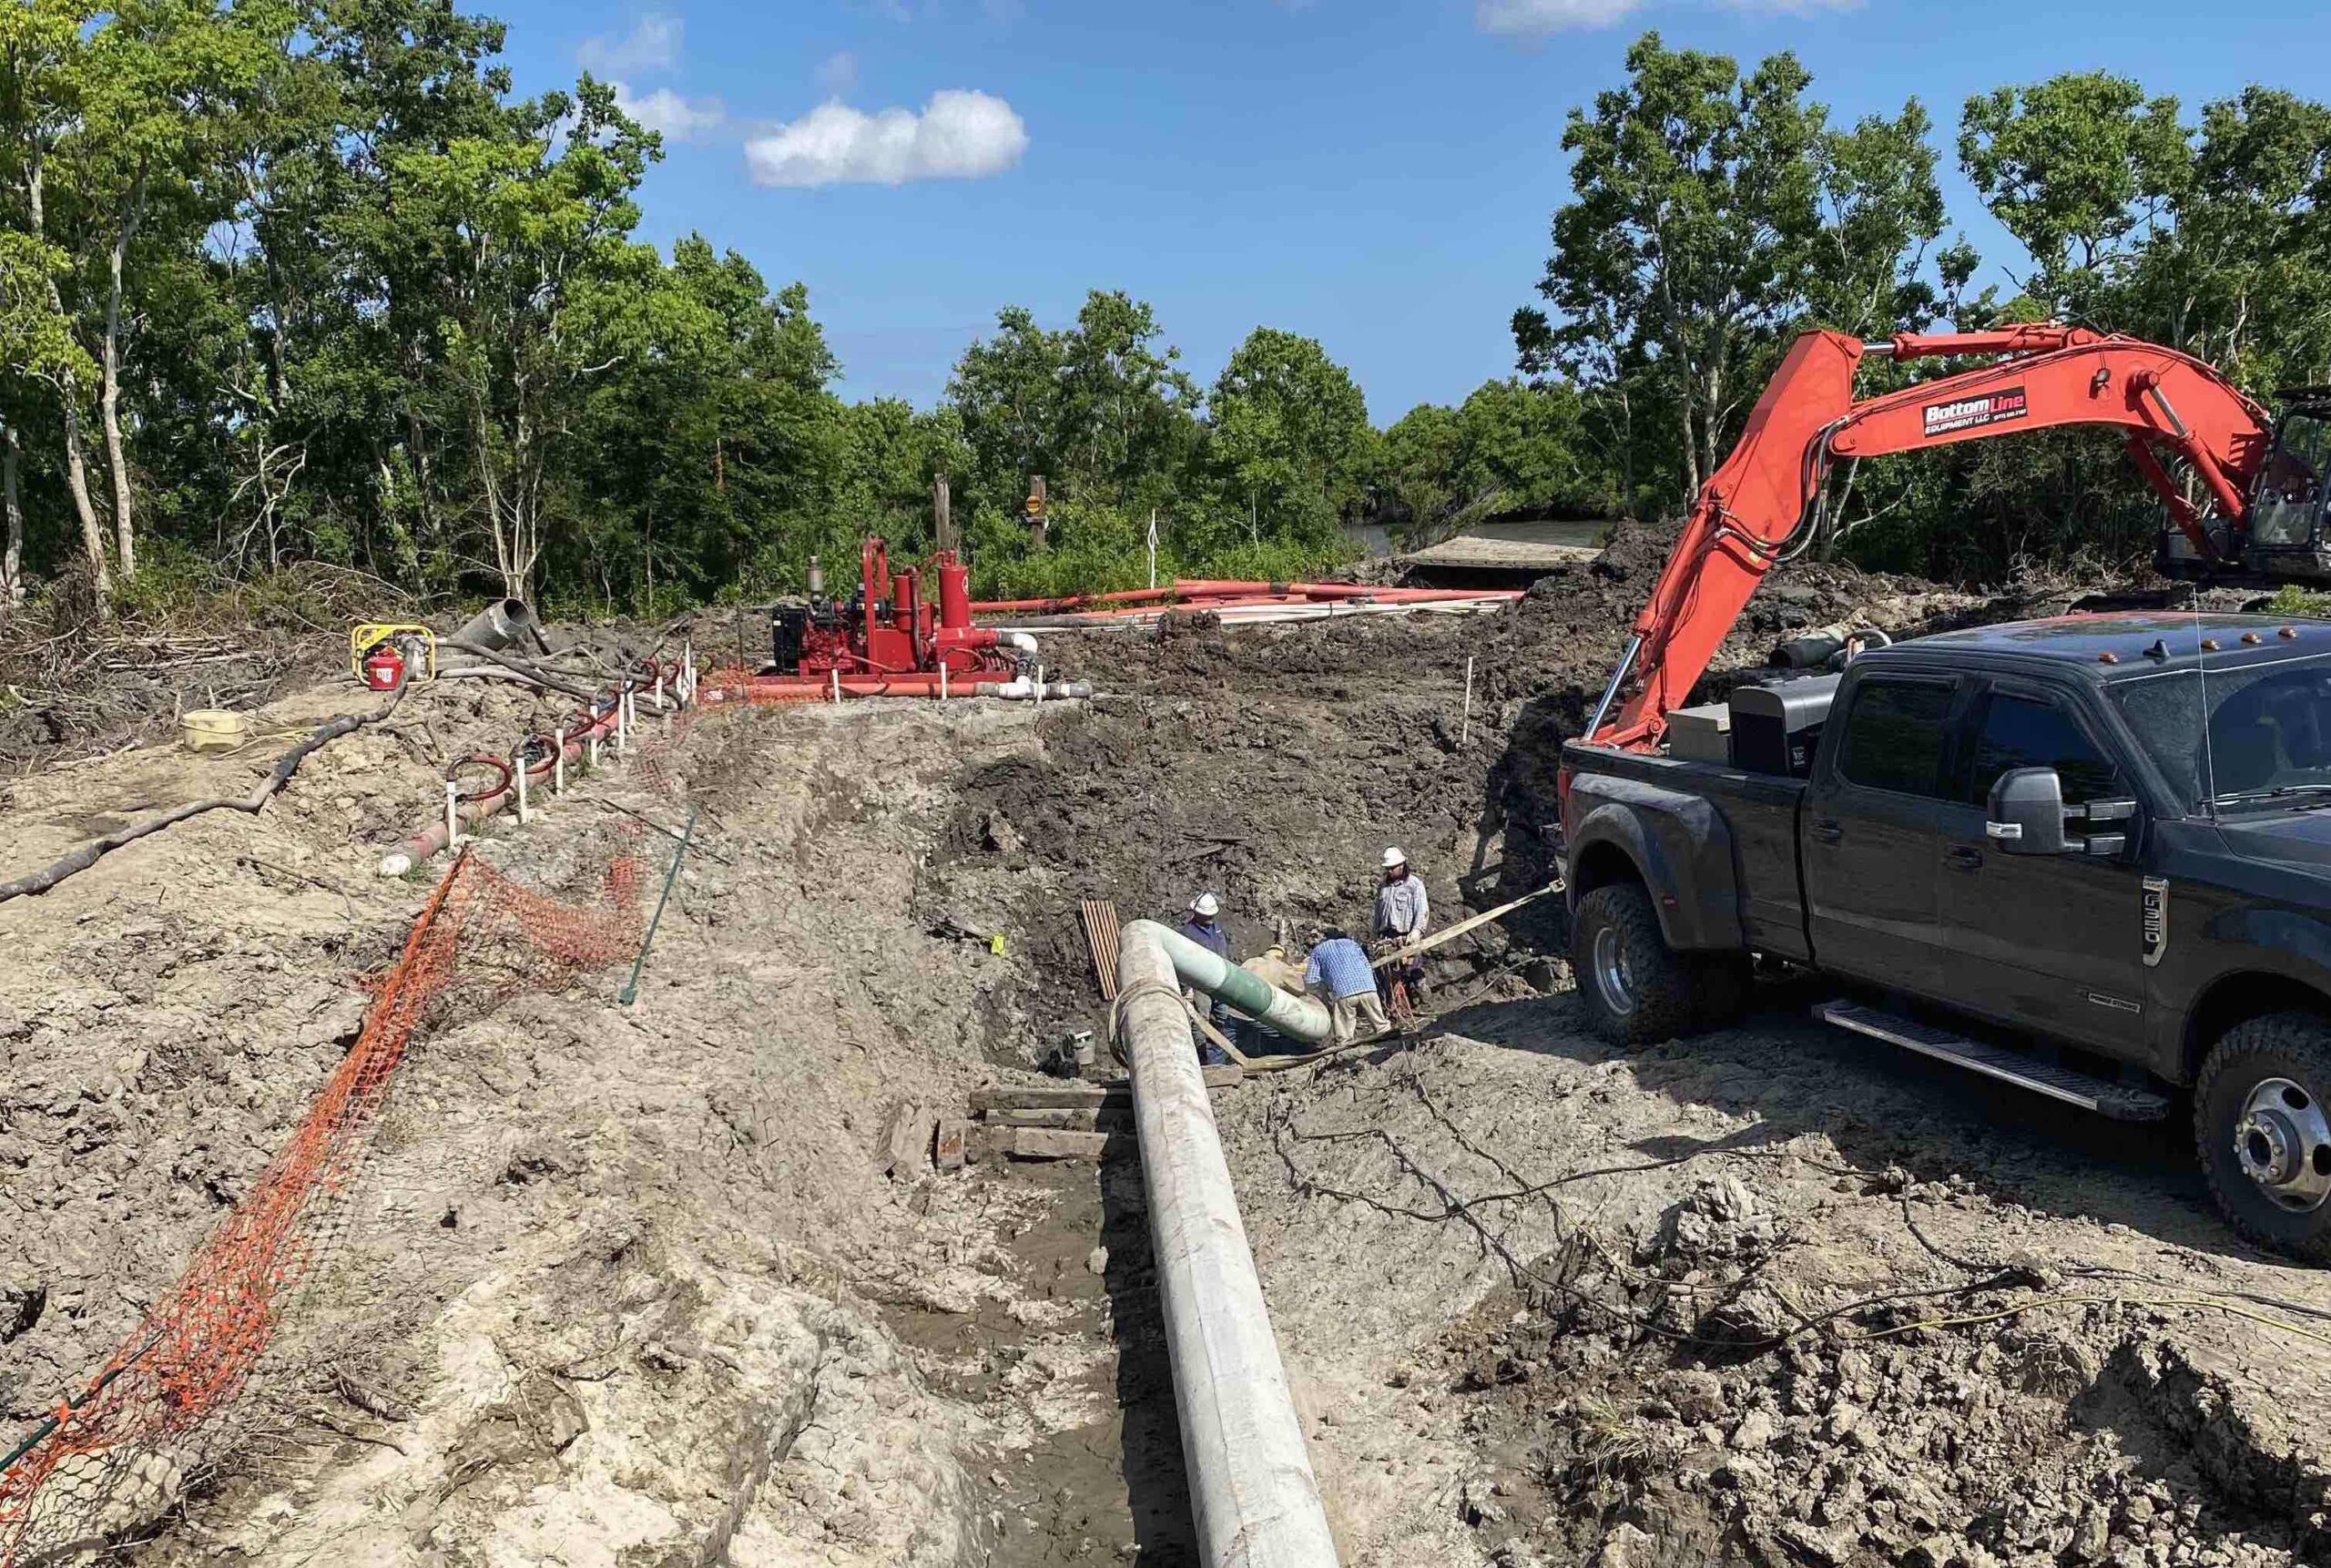 View of pipeline in a ditch after being dug up from underground